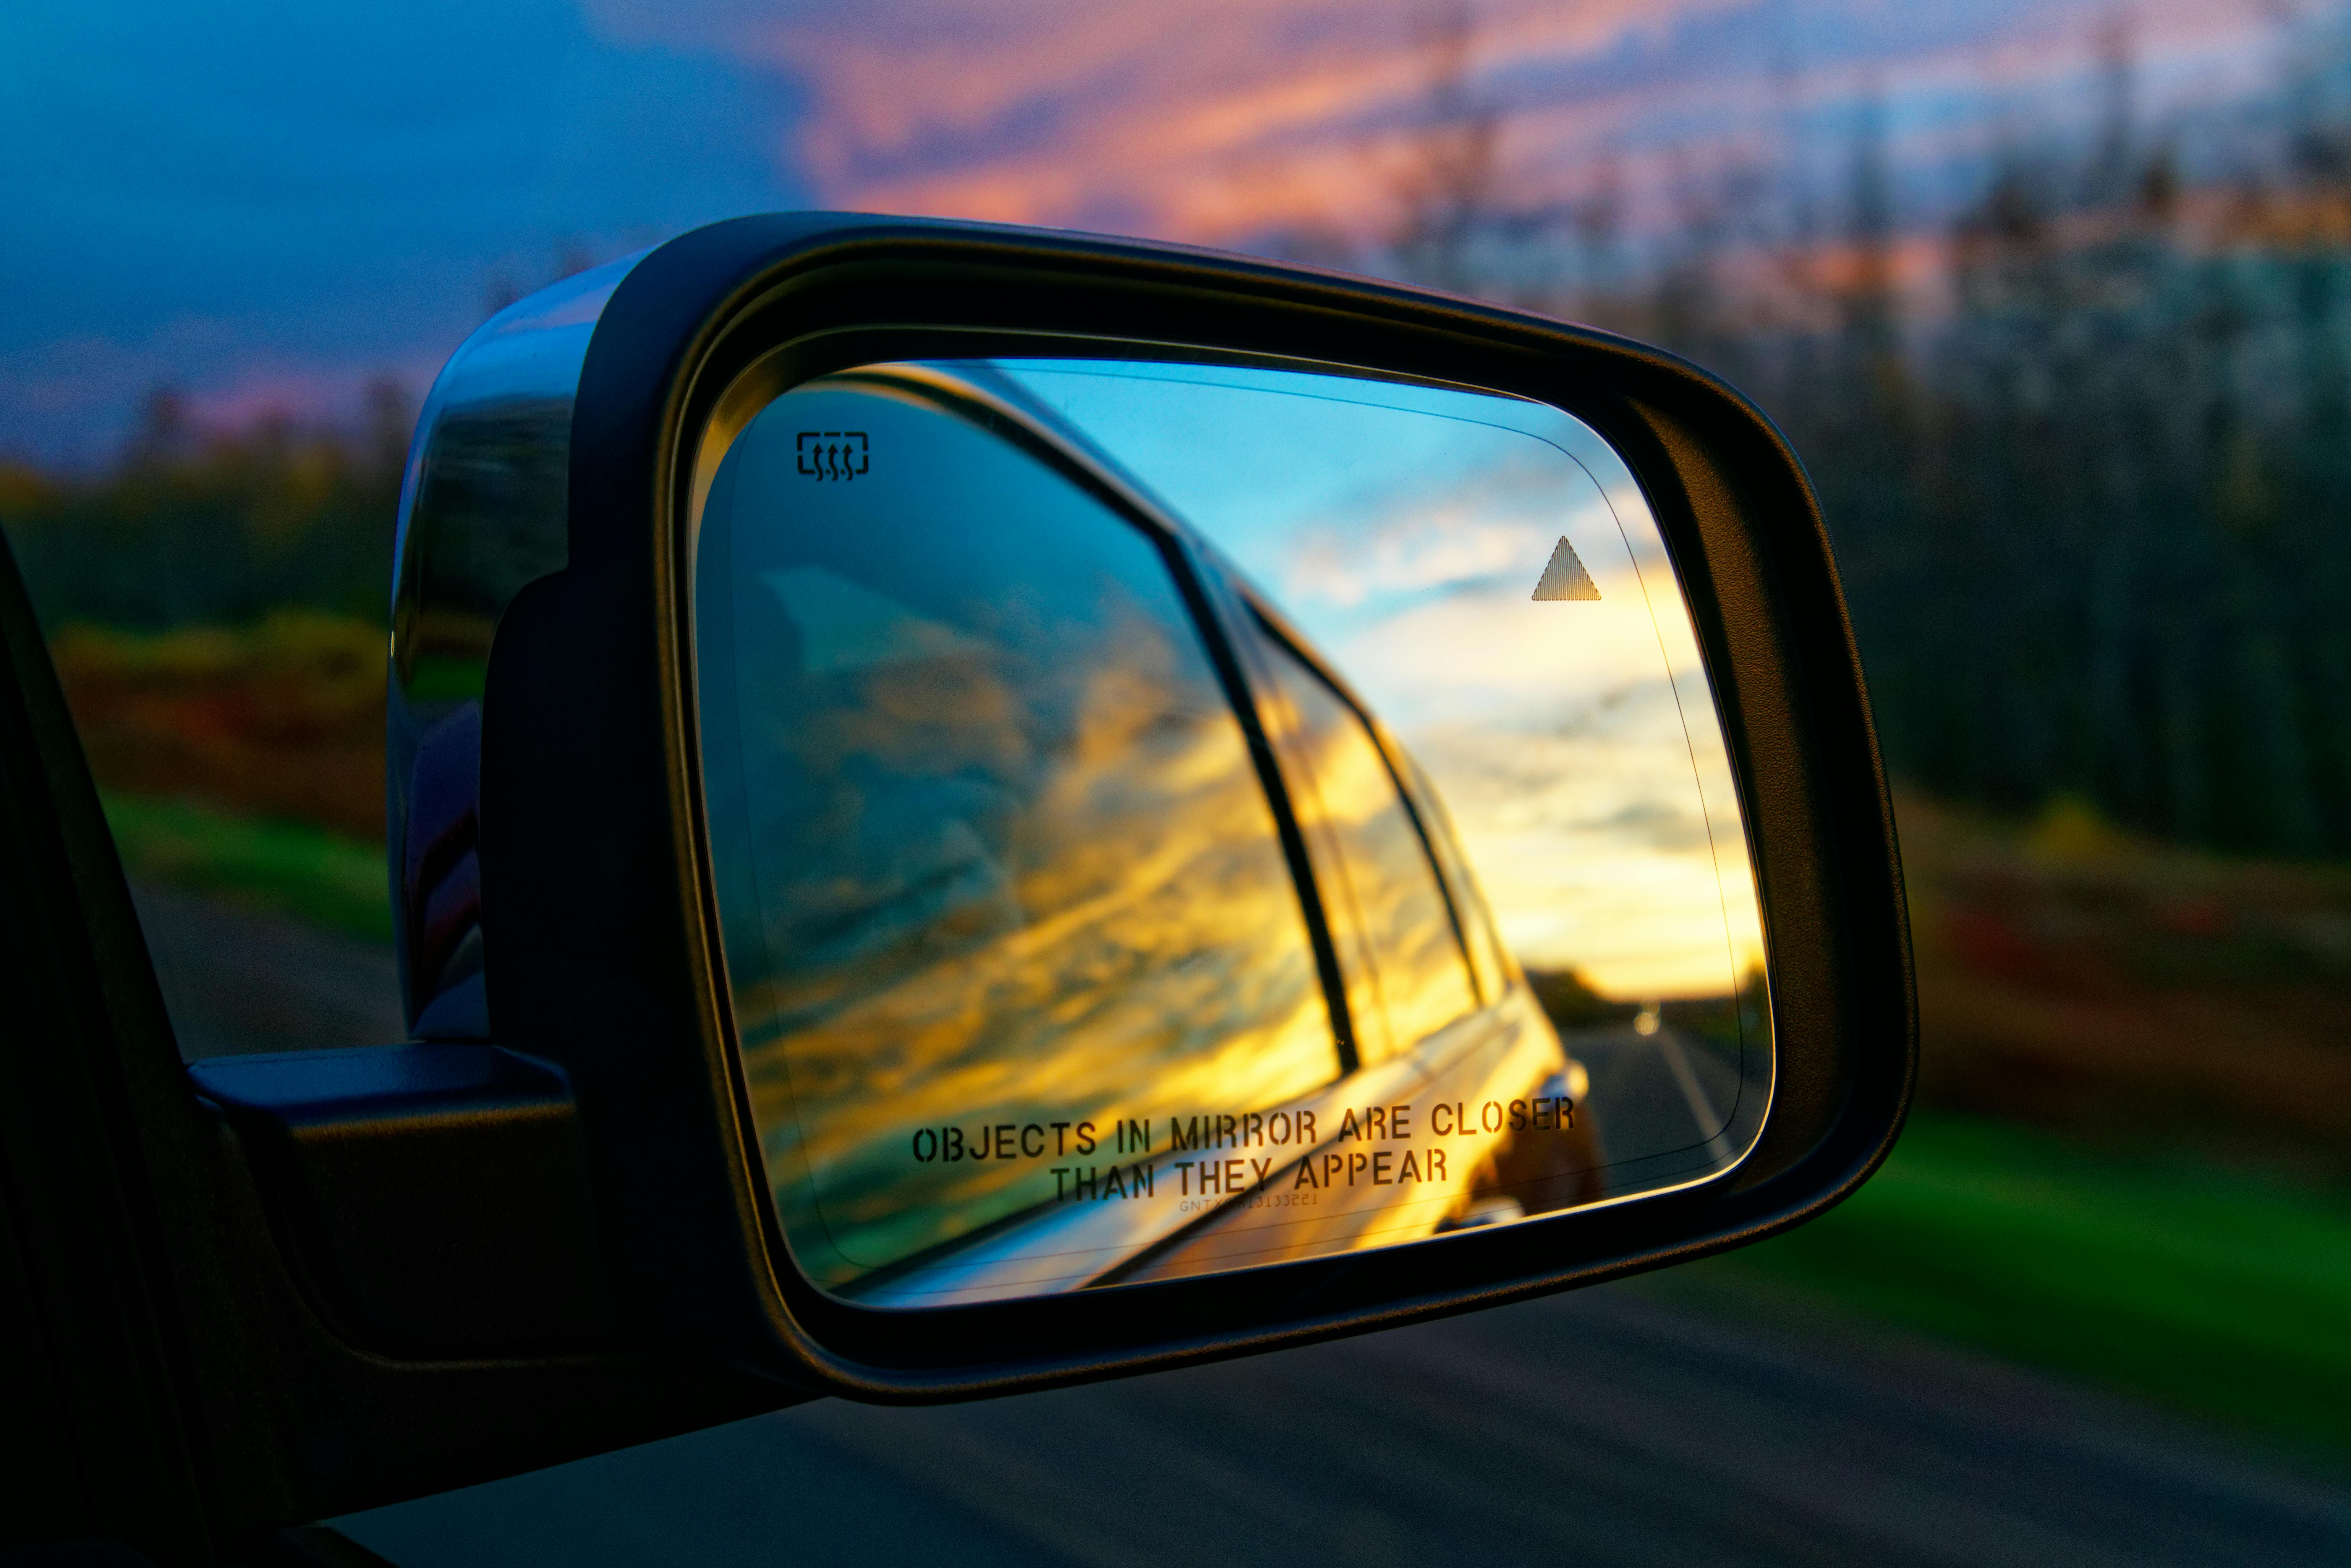 Side mirrors could be the next vehicle feature to disappear